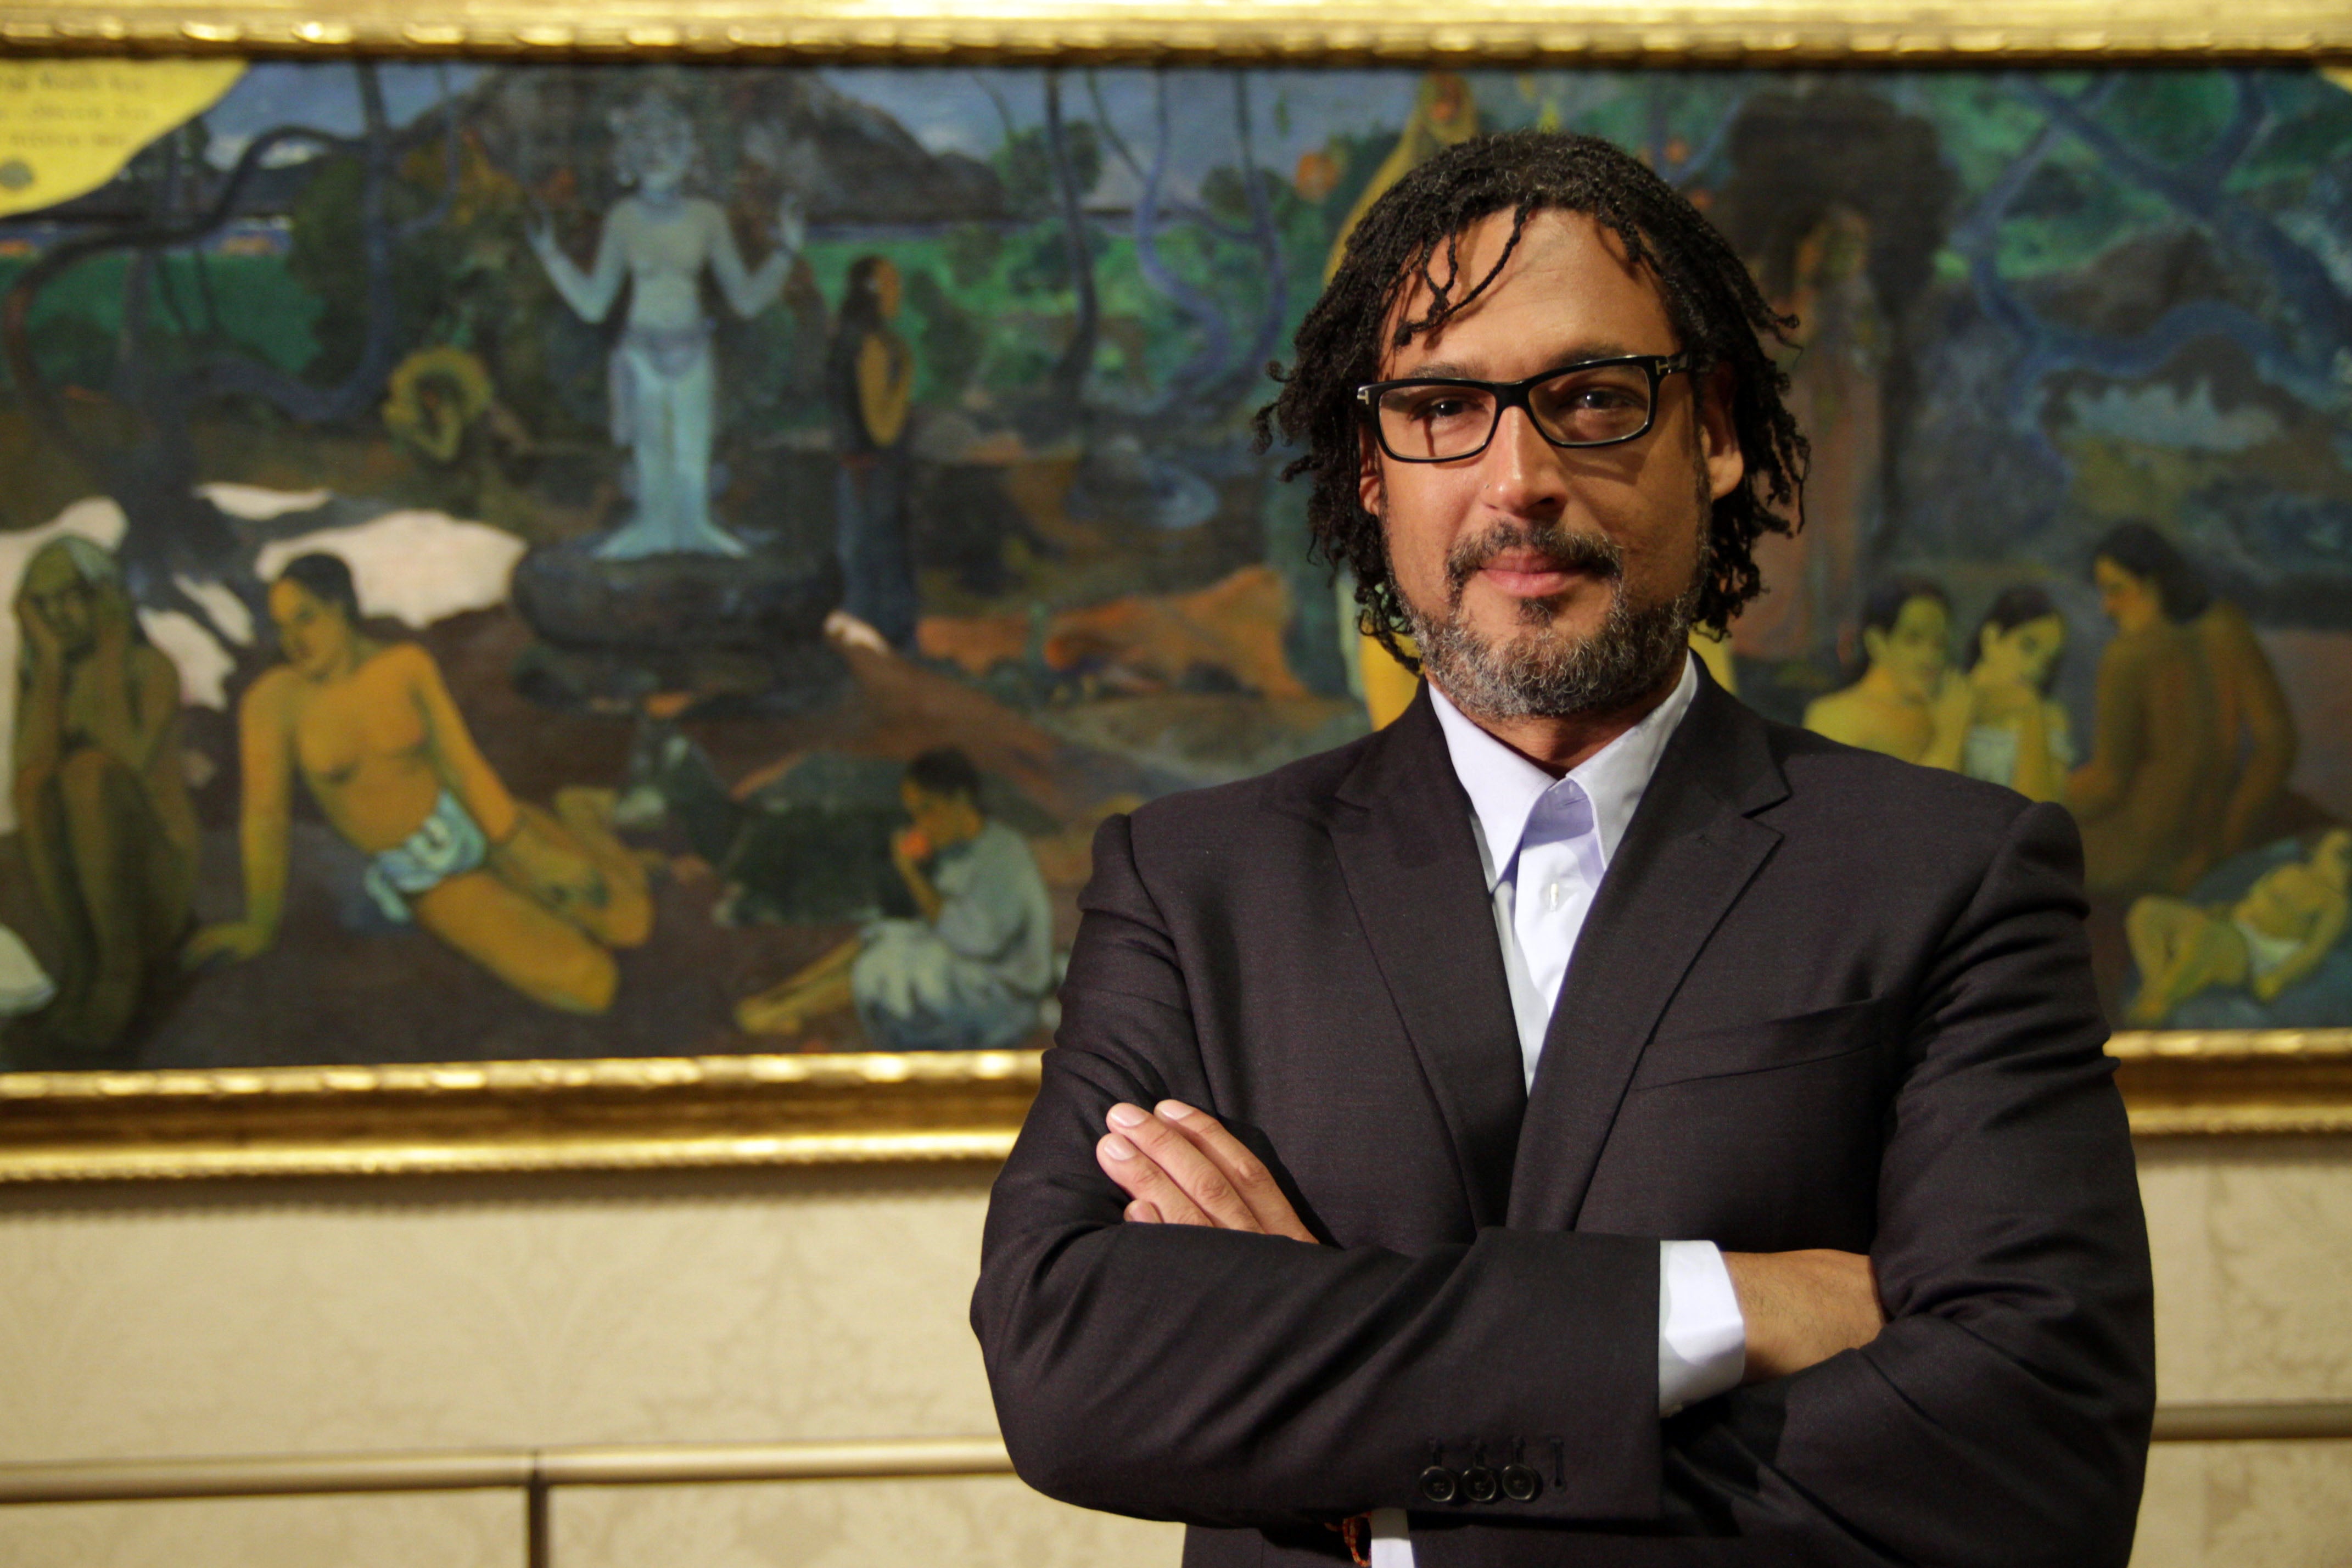 Historian David Olusoga said the census ‘captures one of the most dramatic and dangerous moments in history’ (Nutopia/BBC/PA)